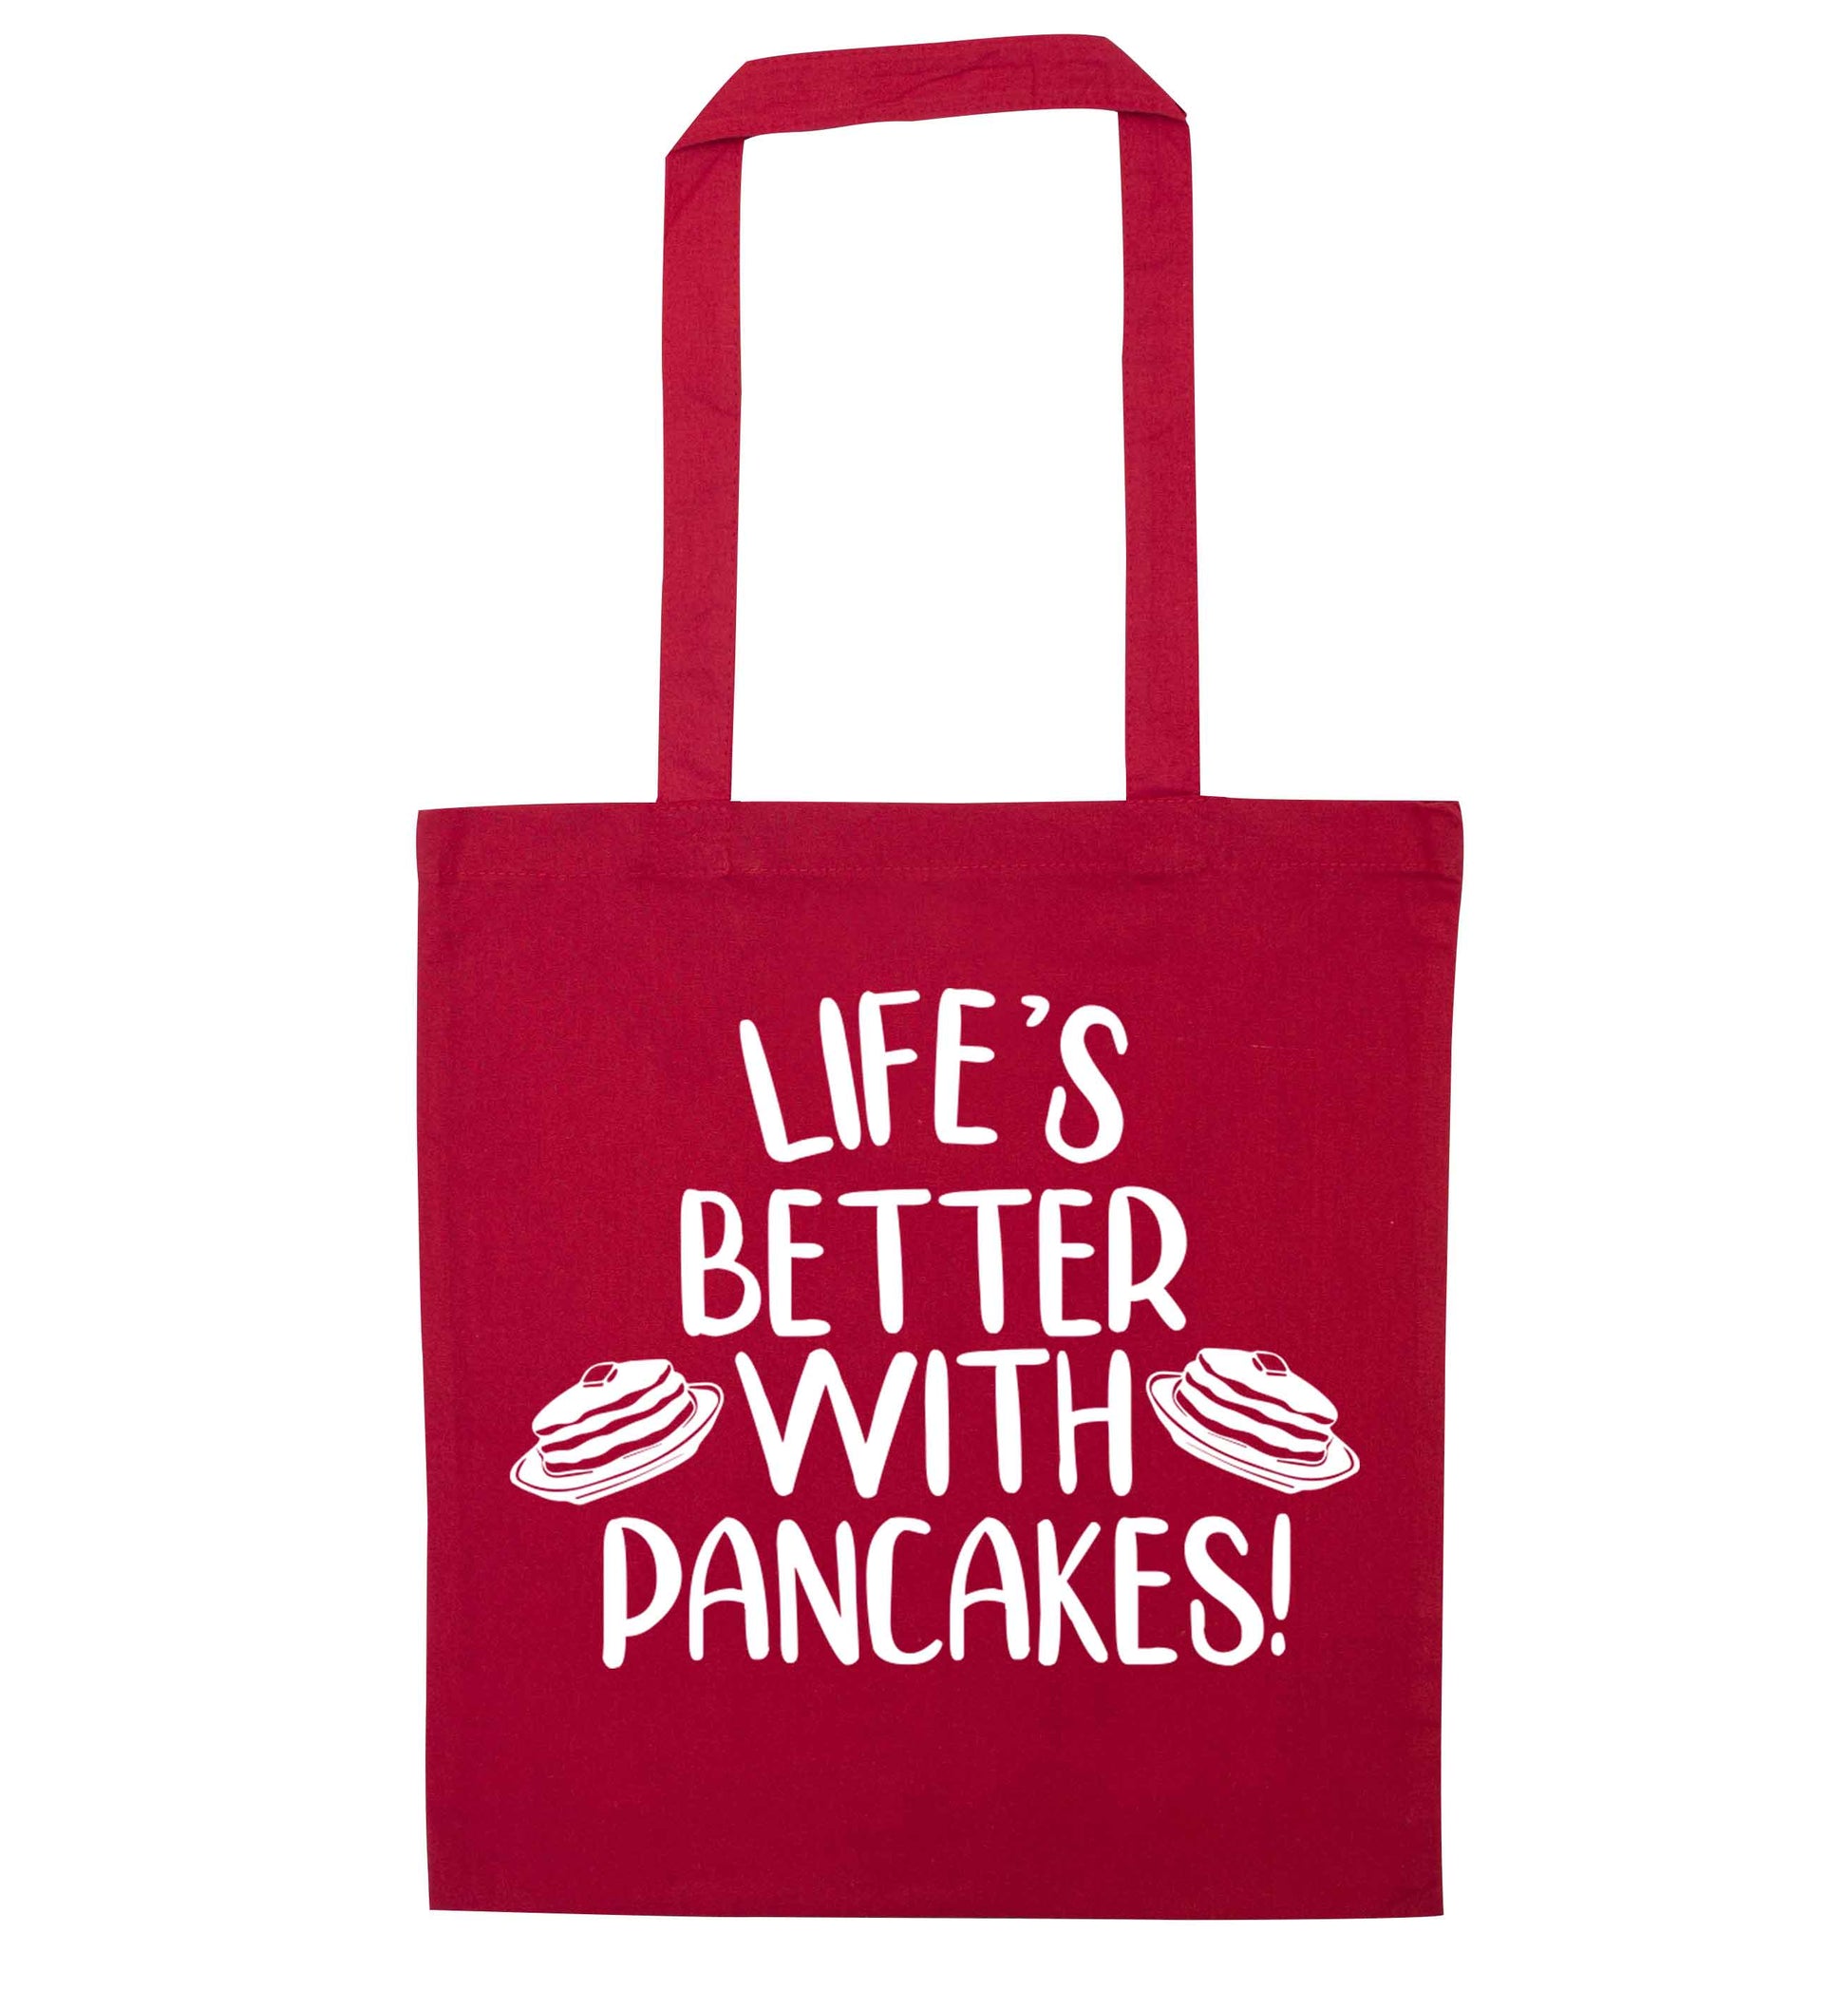 Life's better with pancakes red tote bag